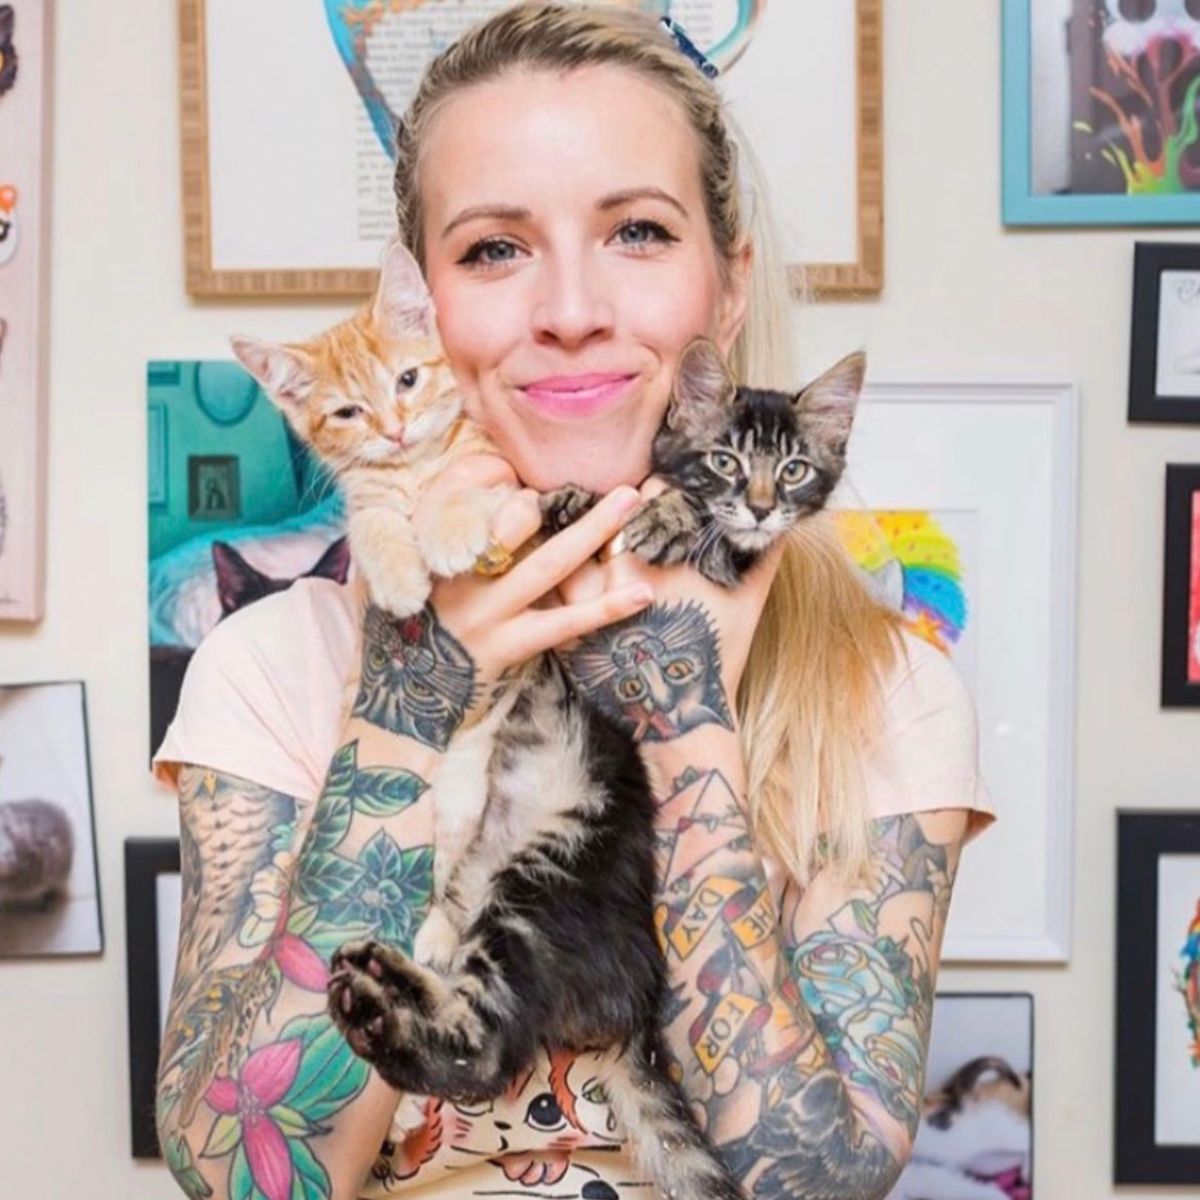 woman with tattoos holding kittens